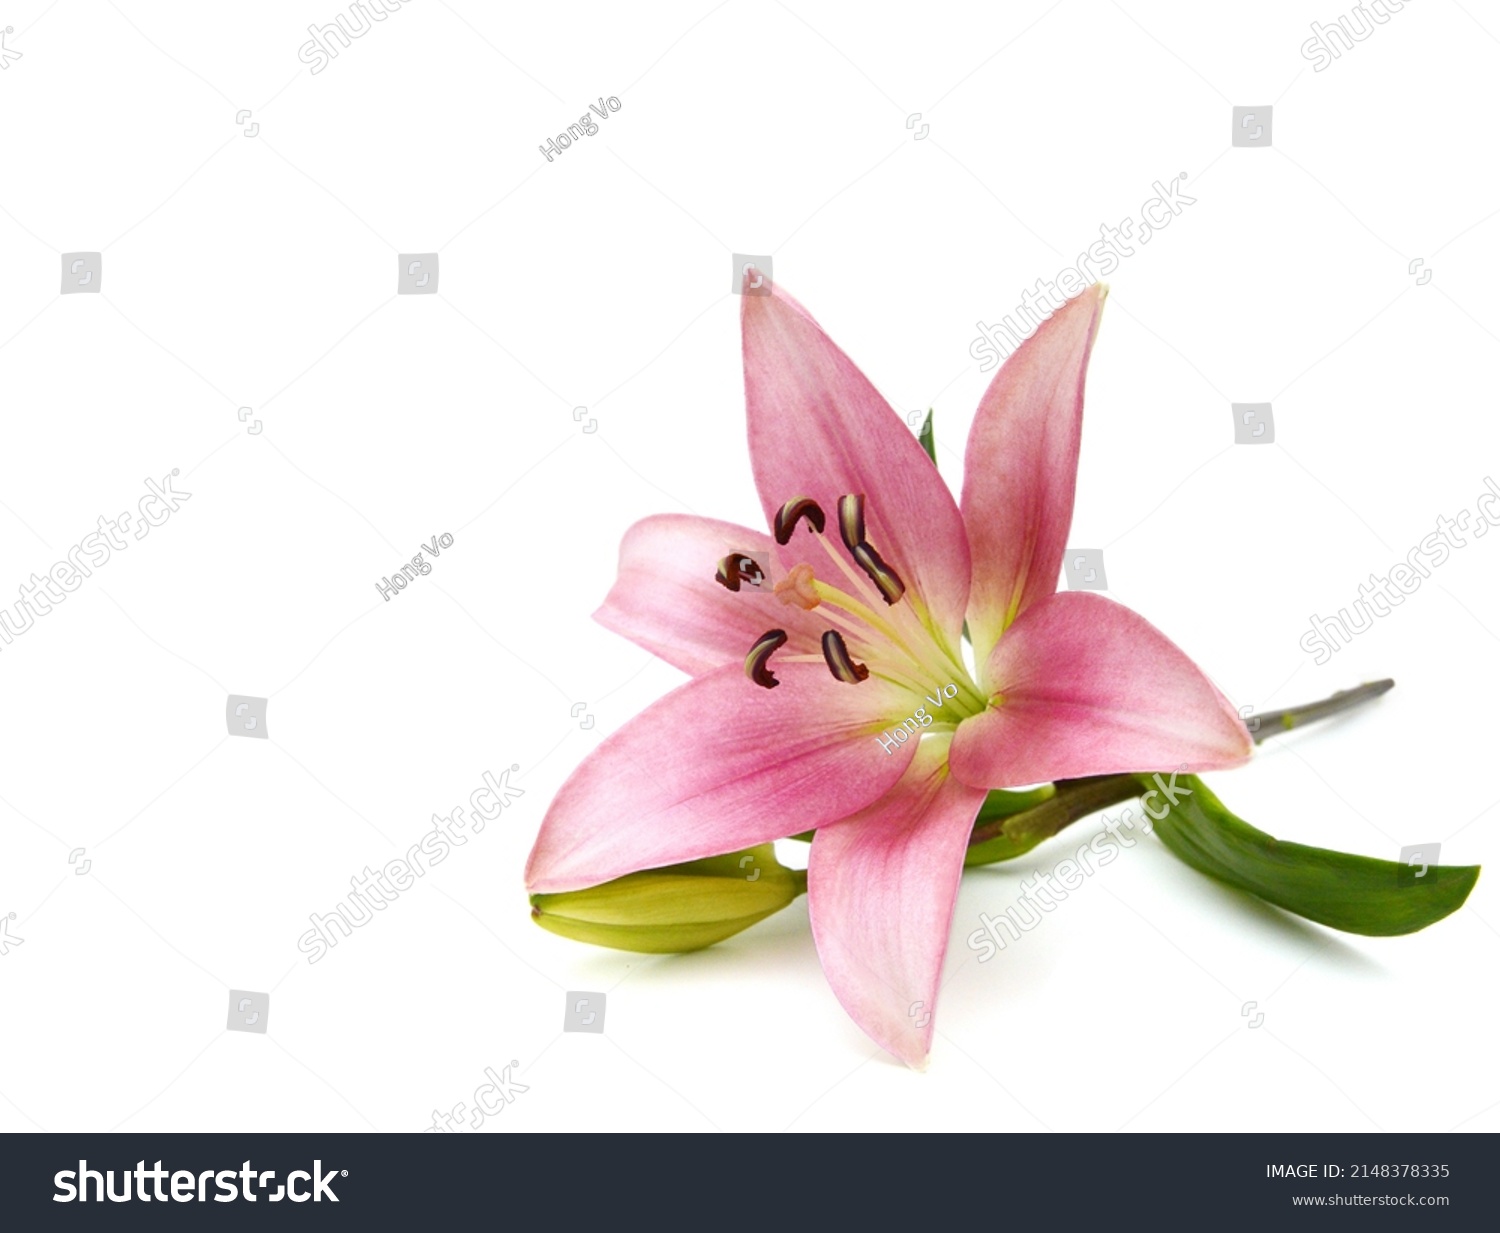 Lily flower isolated on white background  #2148378335